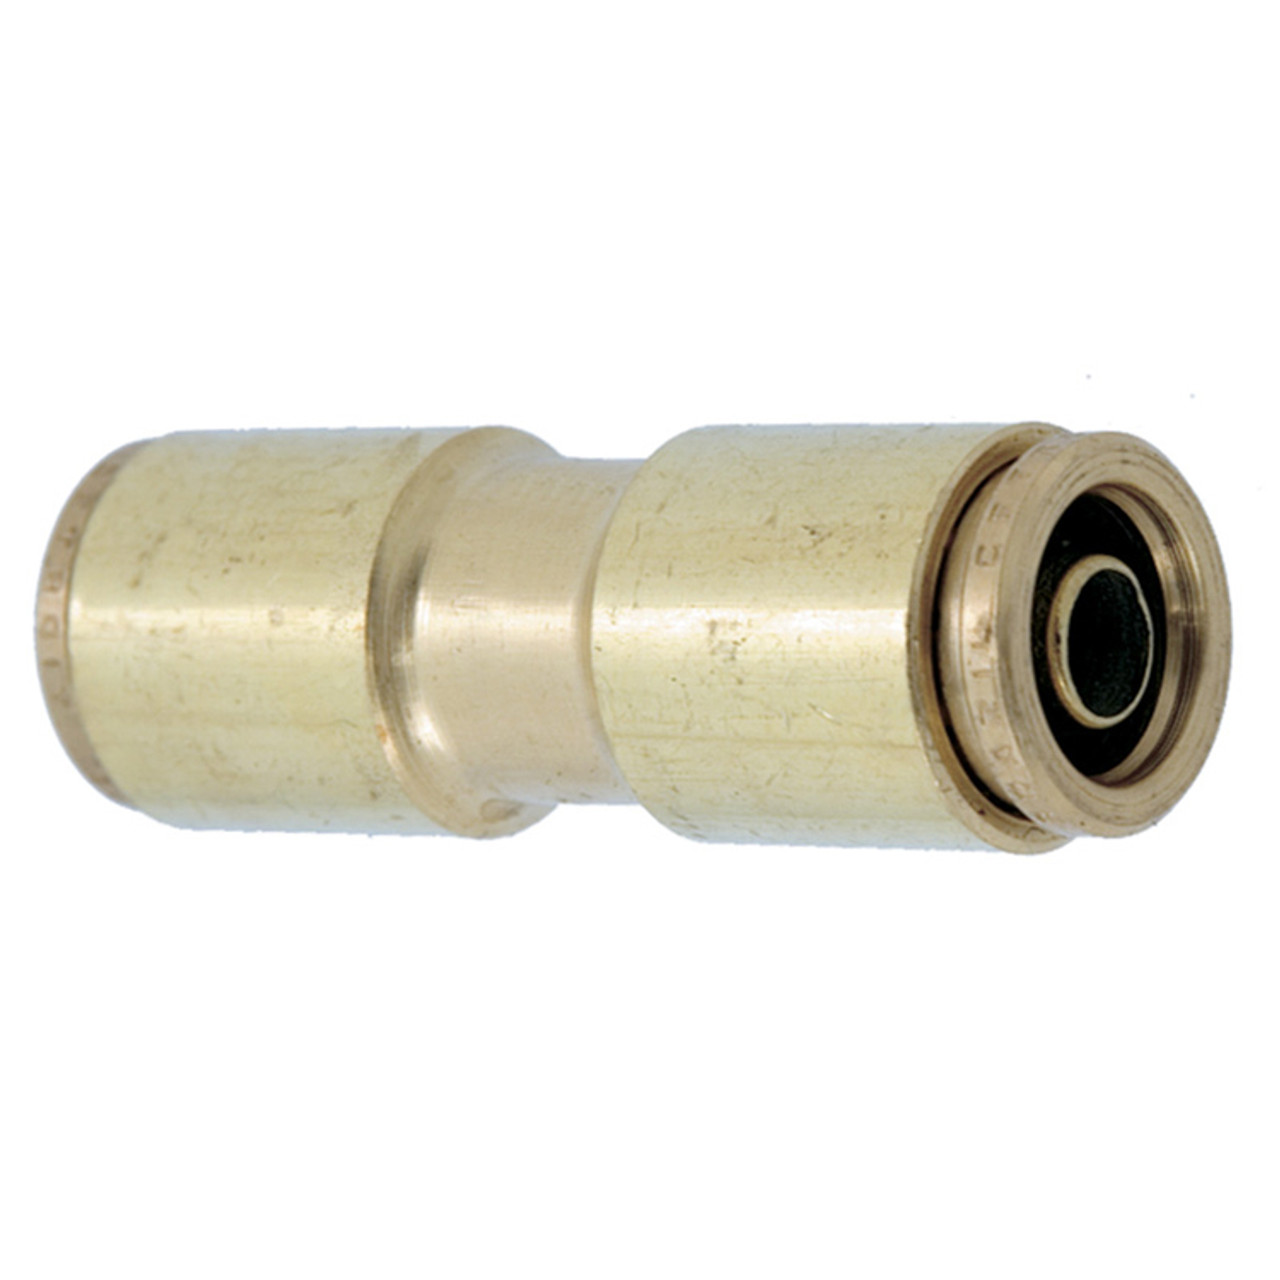 5/8" Brass DOT Push-To-Connect Union   G7070P-10-10